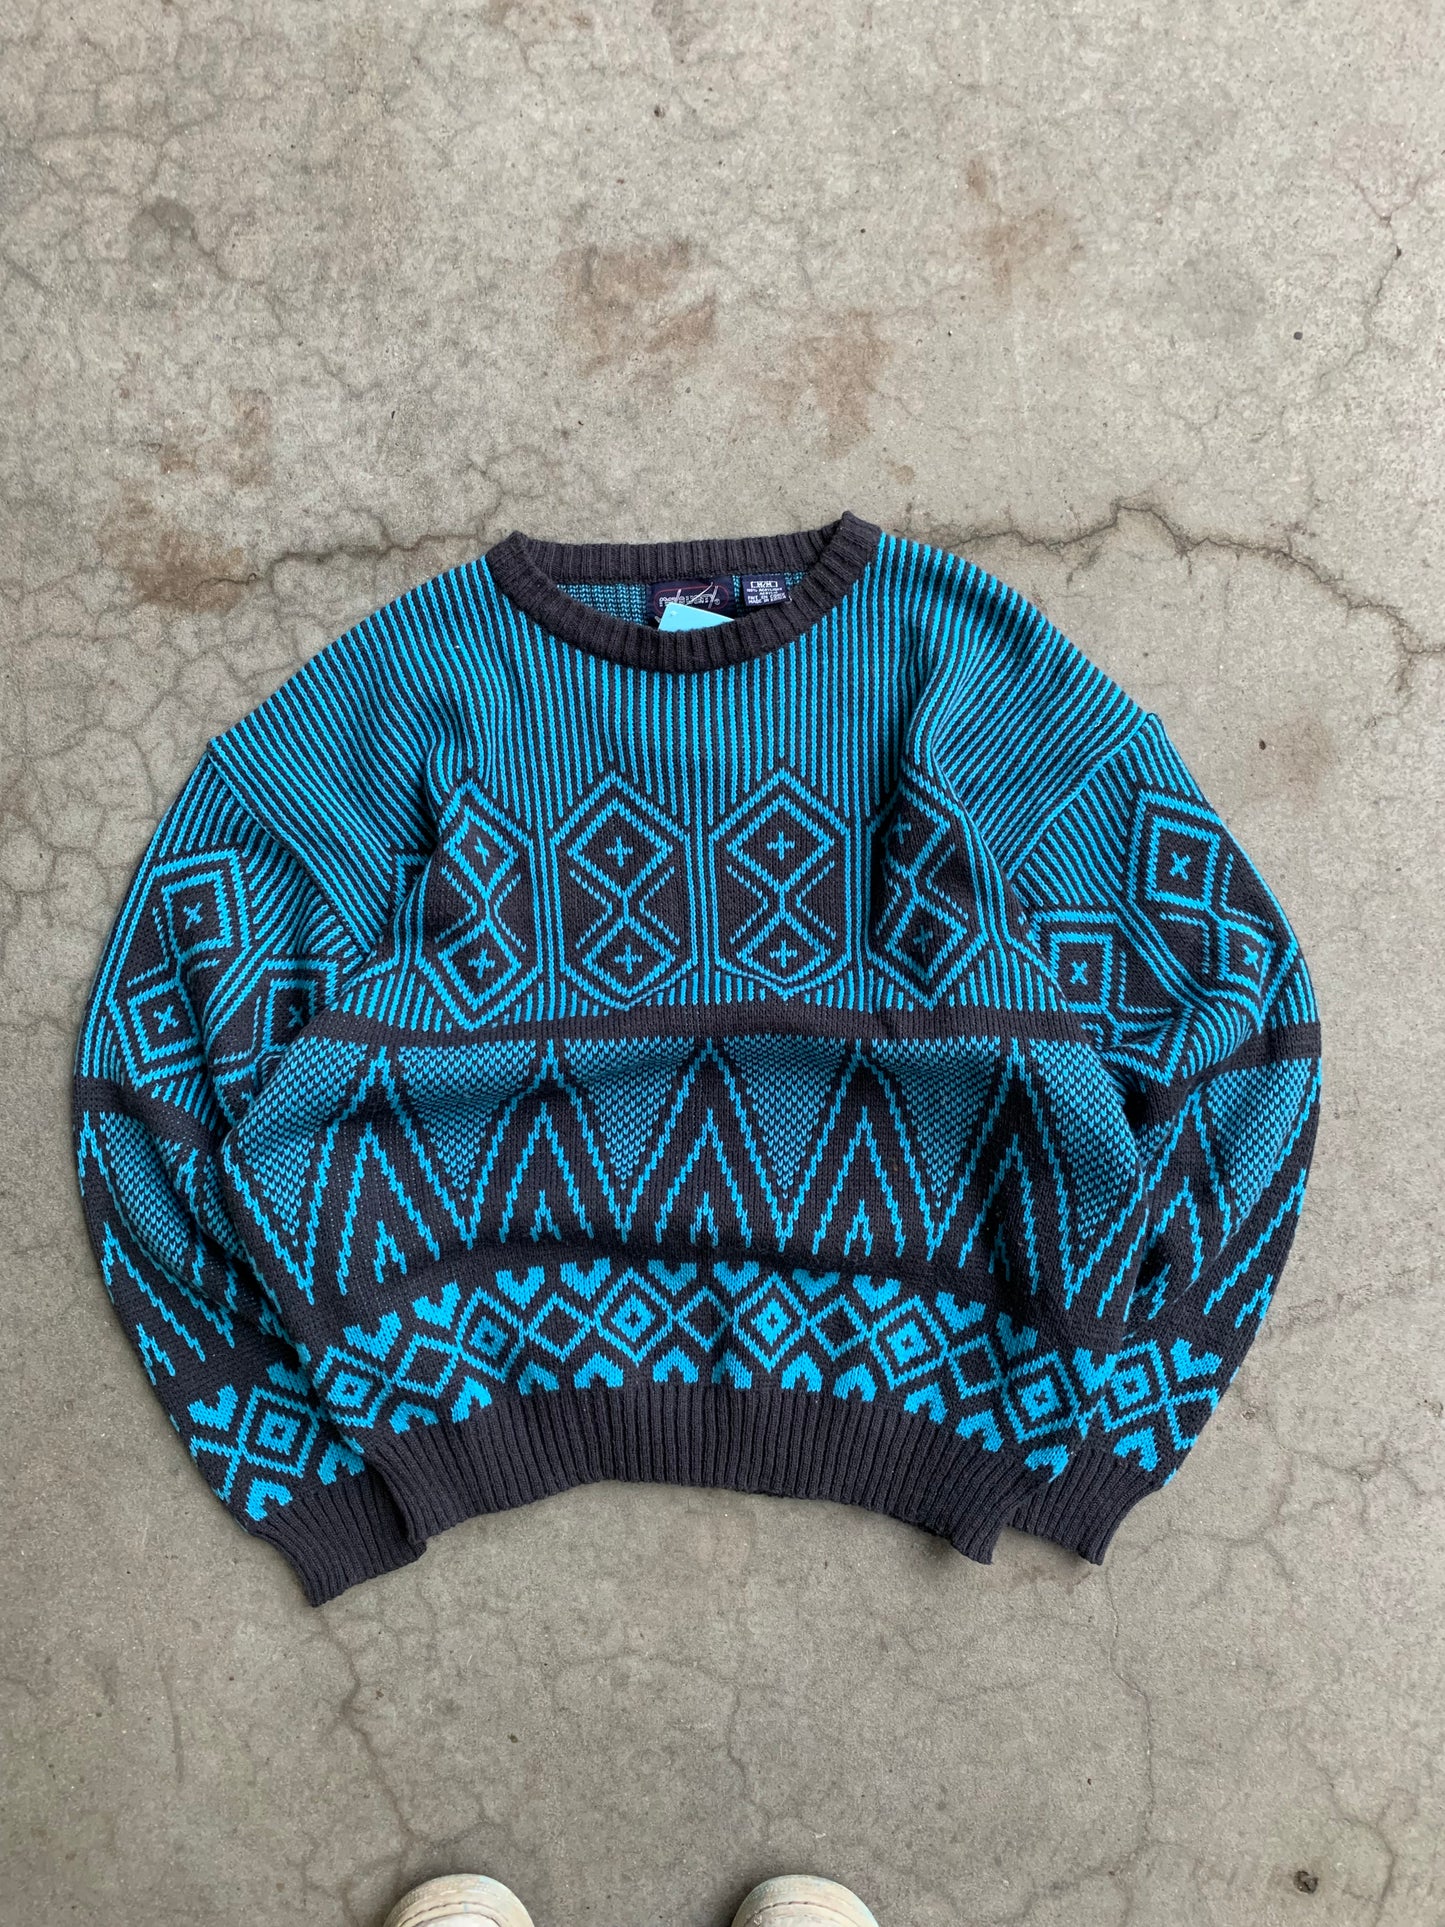 (M) 90’s Patterned Knit Sweater